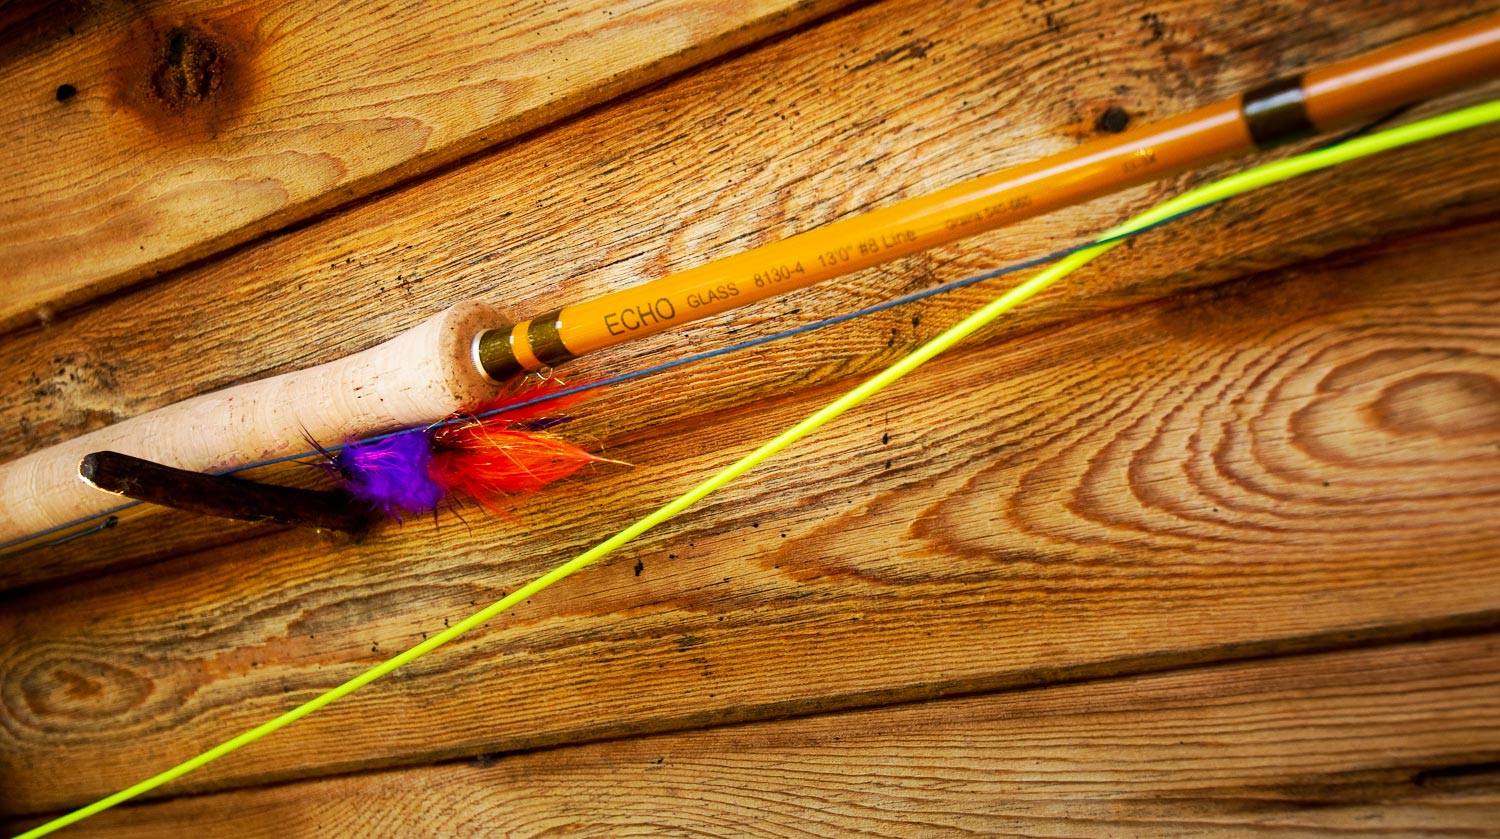 T&T DNA spey - Fly Fishing, Gink and Gasoline